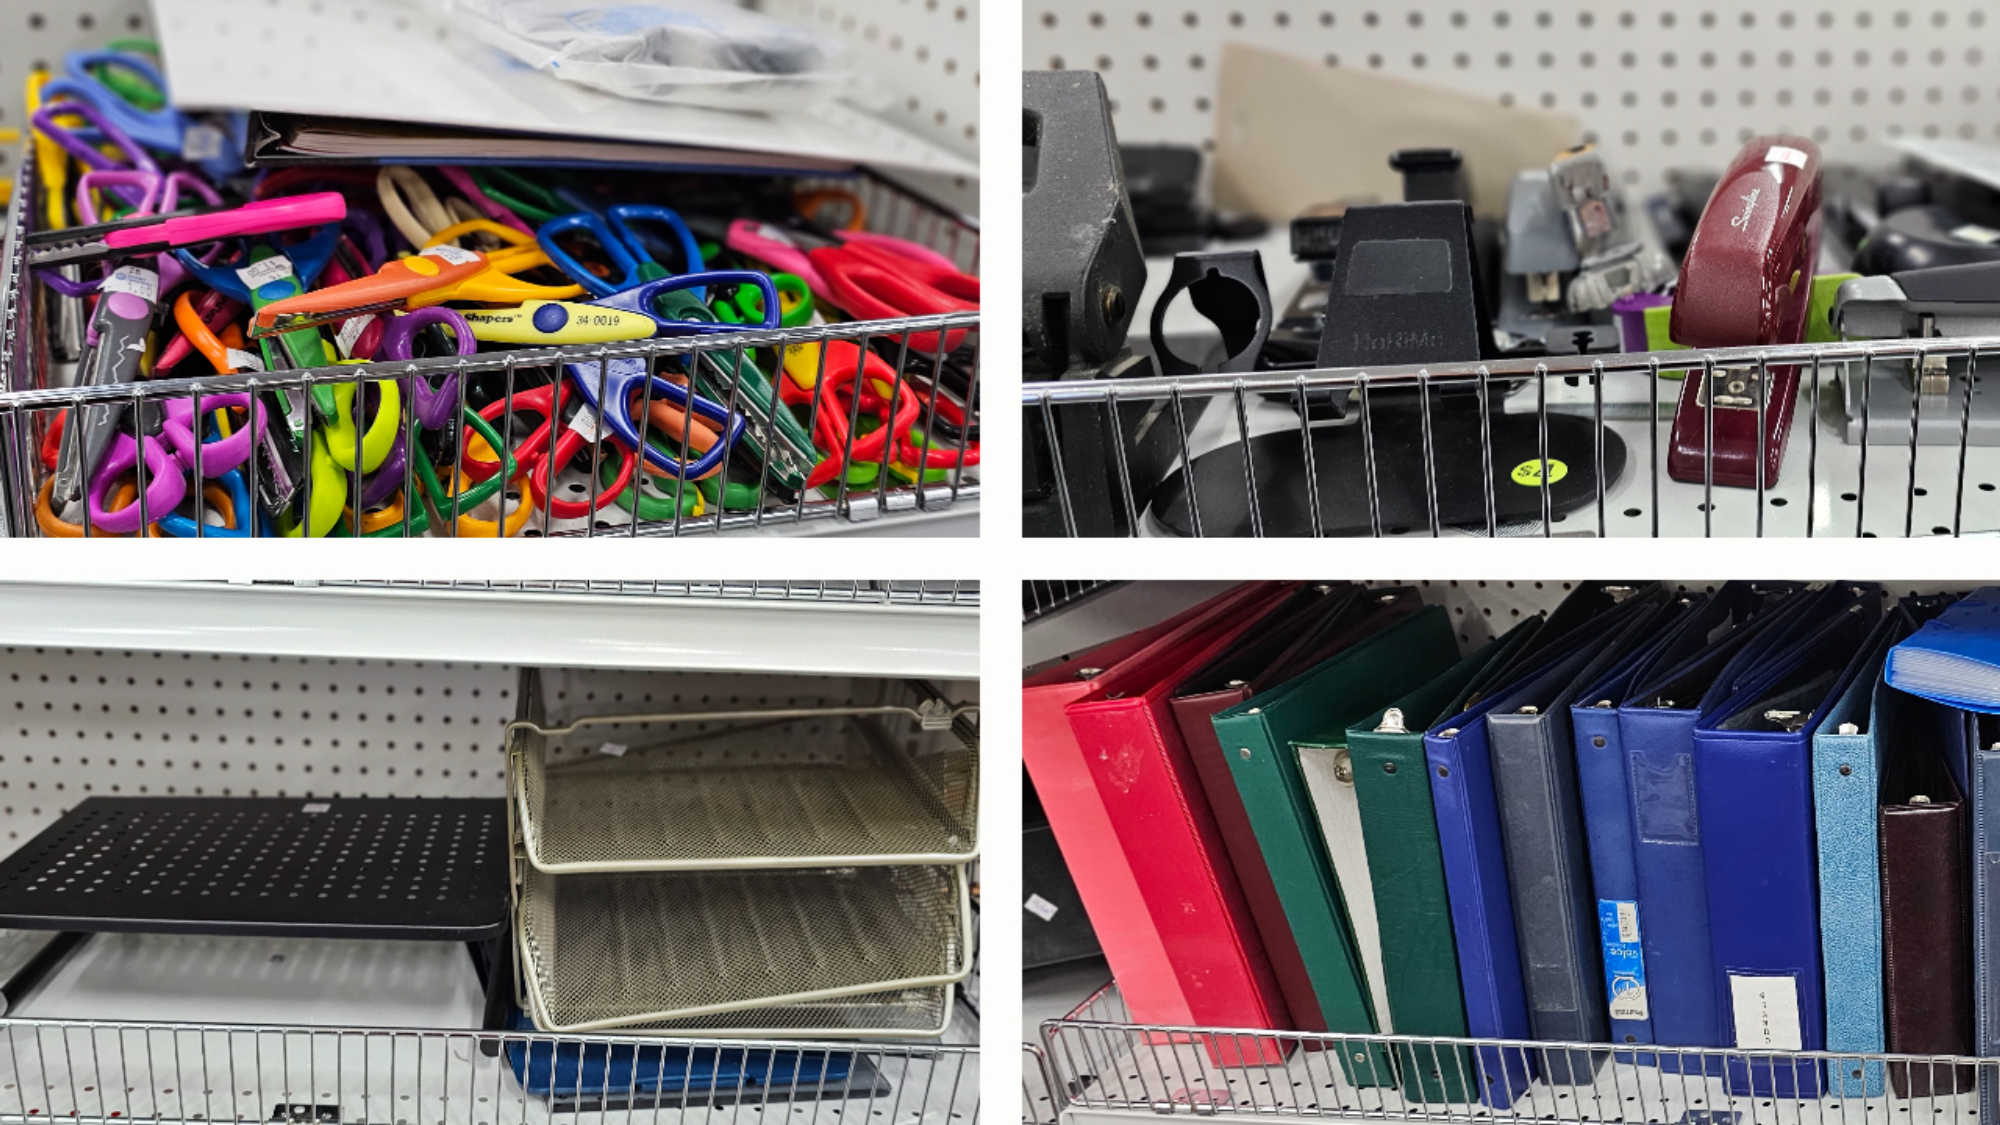 A collage showing various school supplies available at Deseret Industries, including scissors, three-hole punches, staplers, paper trays, and three-ring binders.